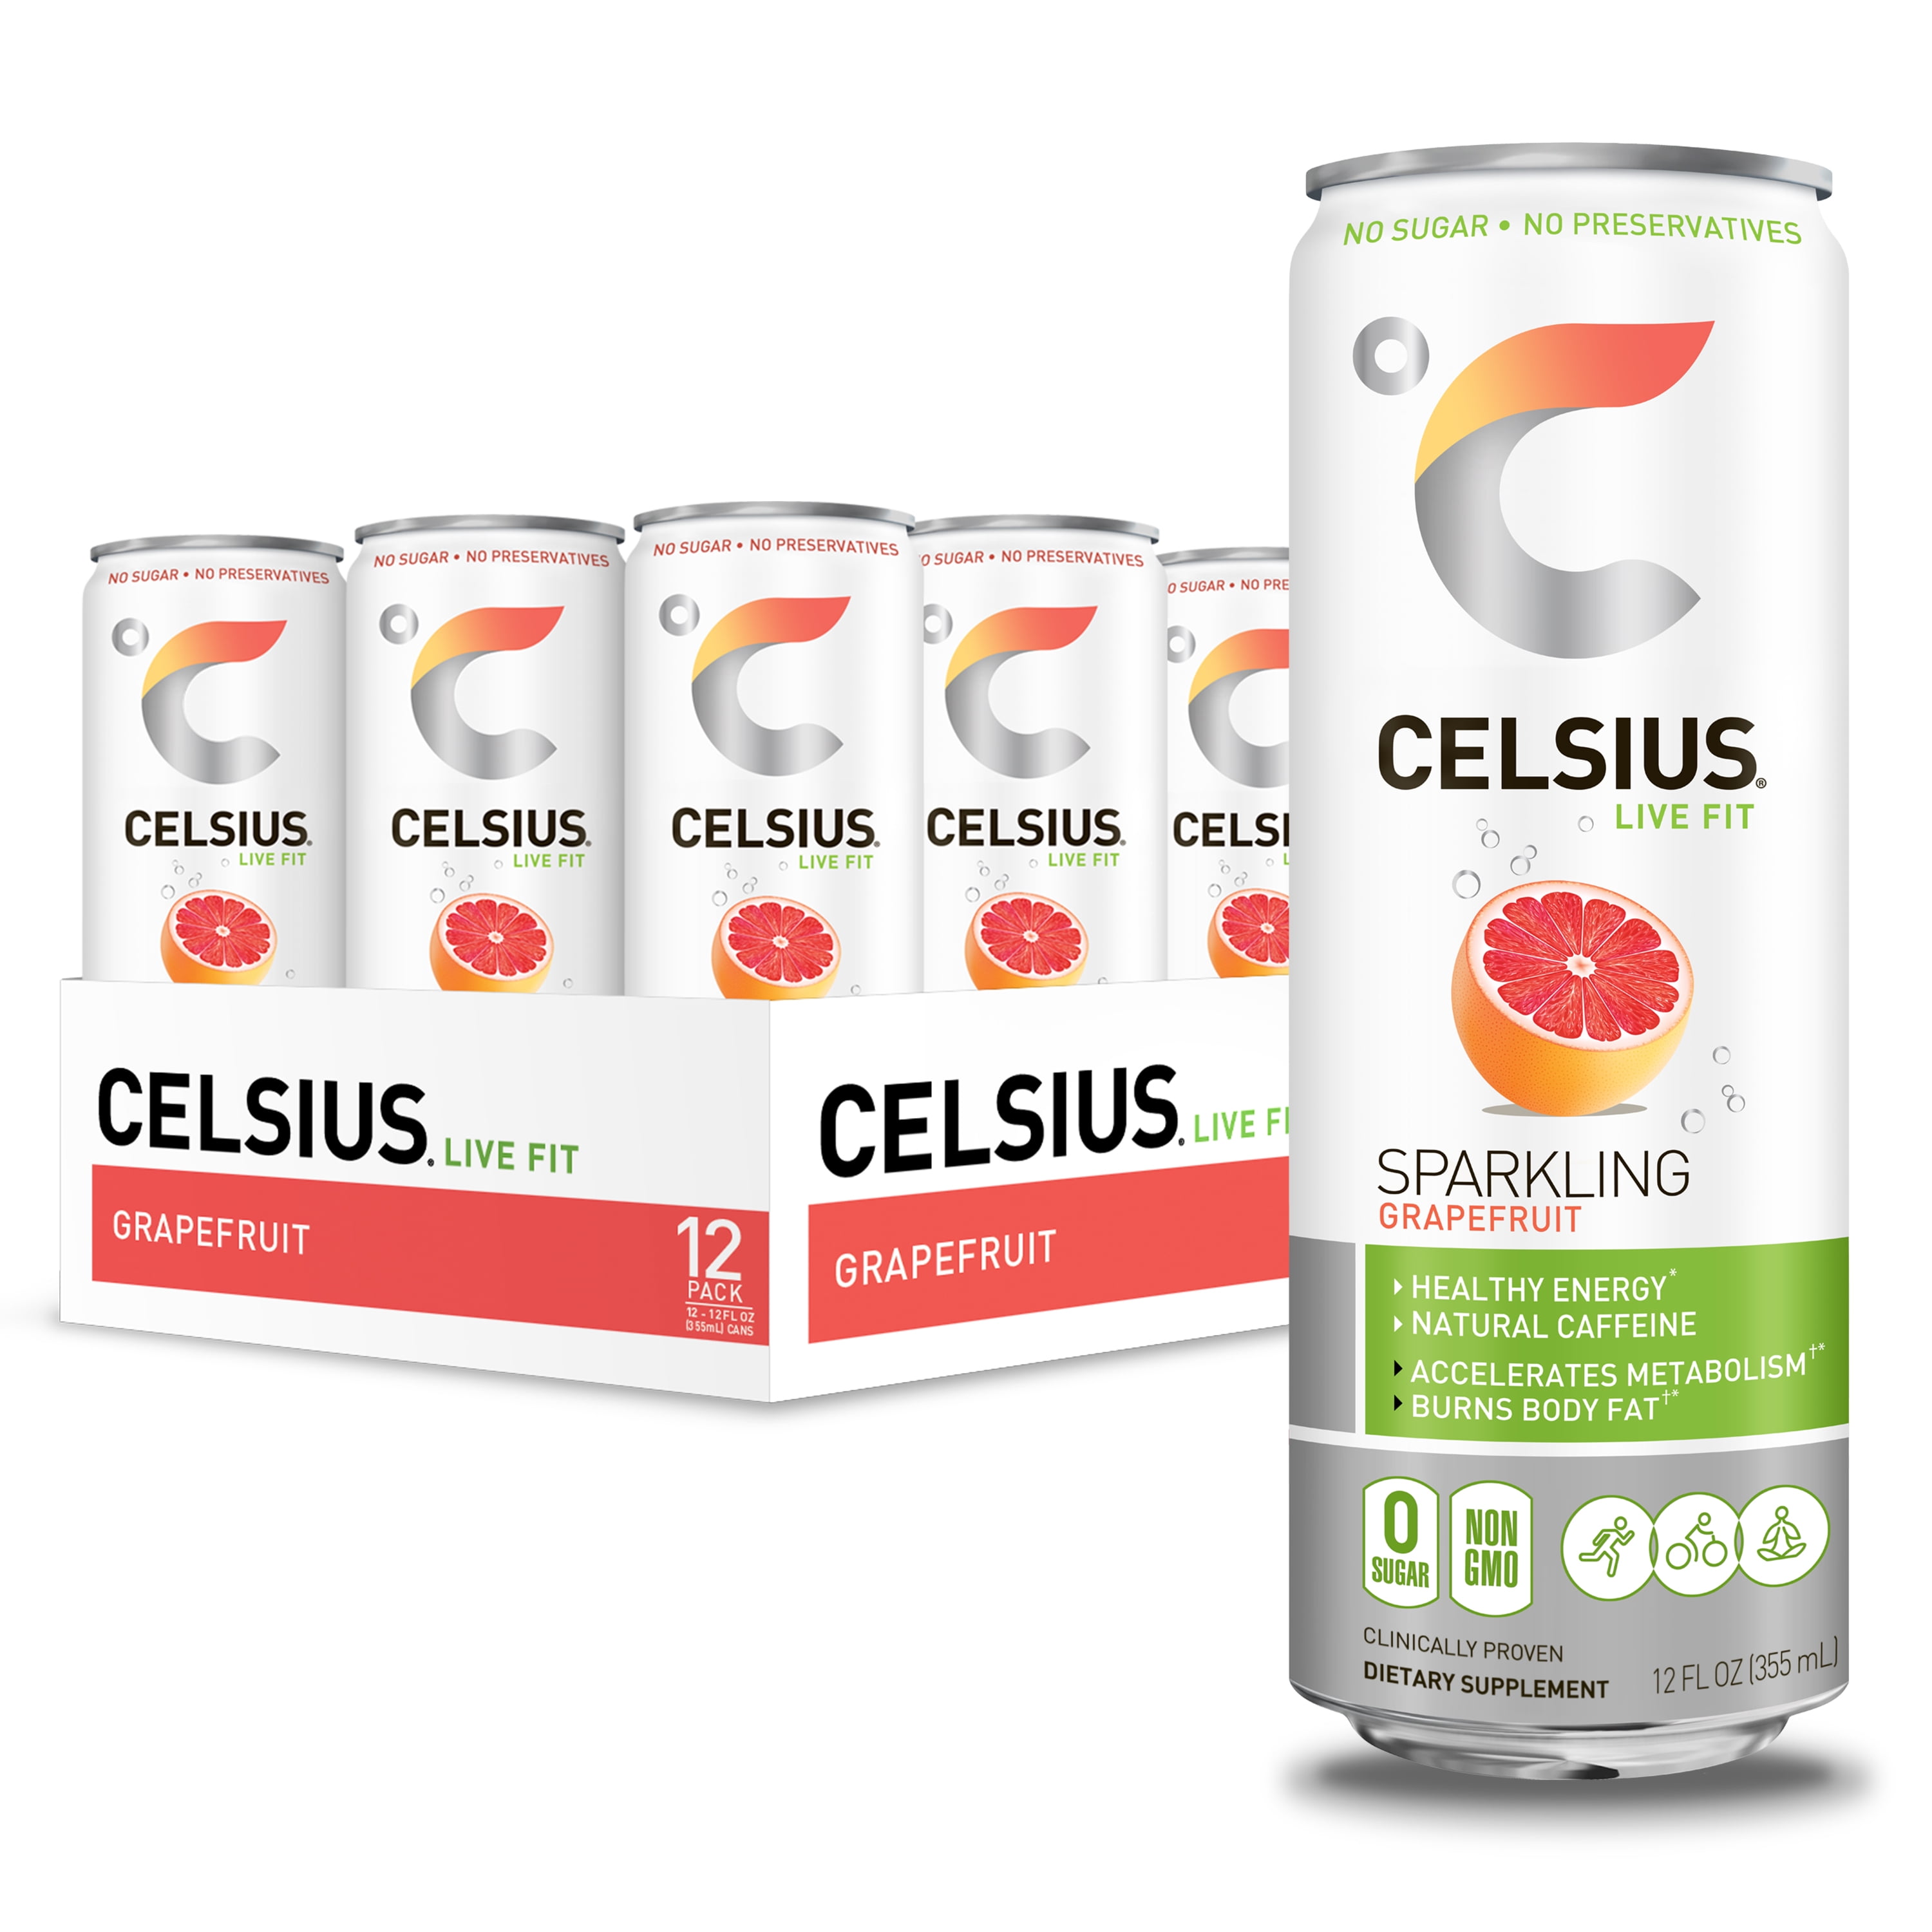 celsius-sweetened-with-stevia-sparkling-grapefruit-fitness-drink-zero